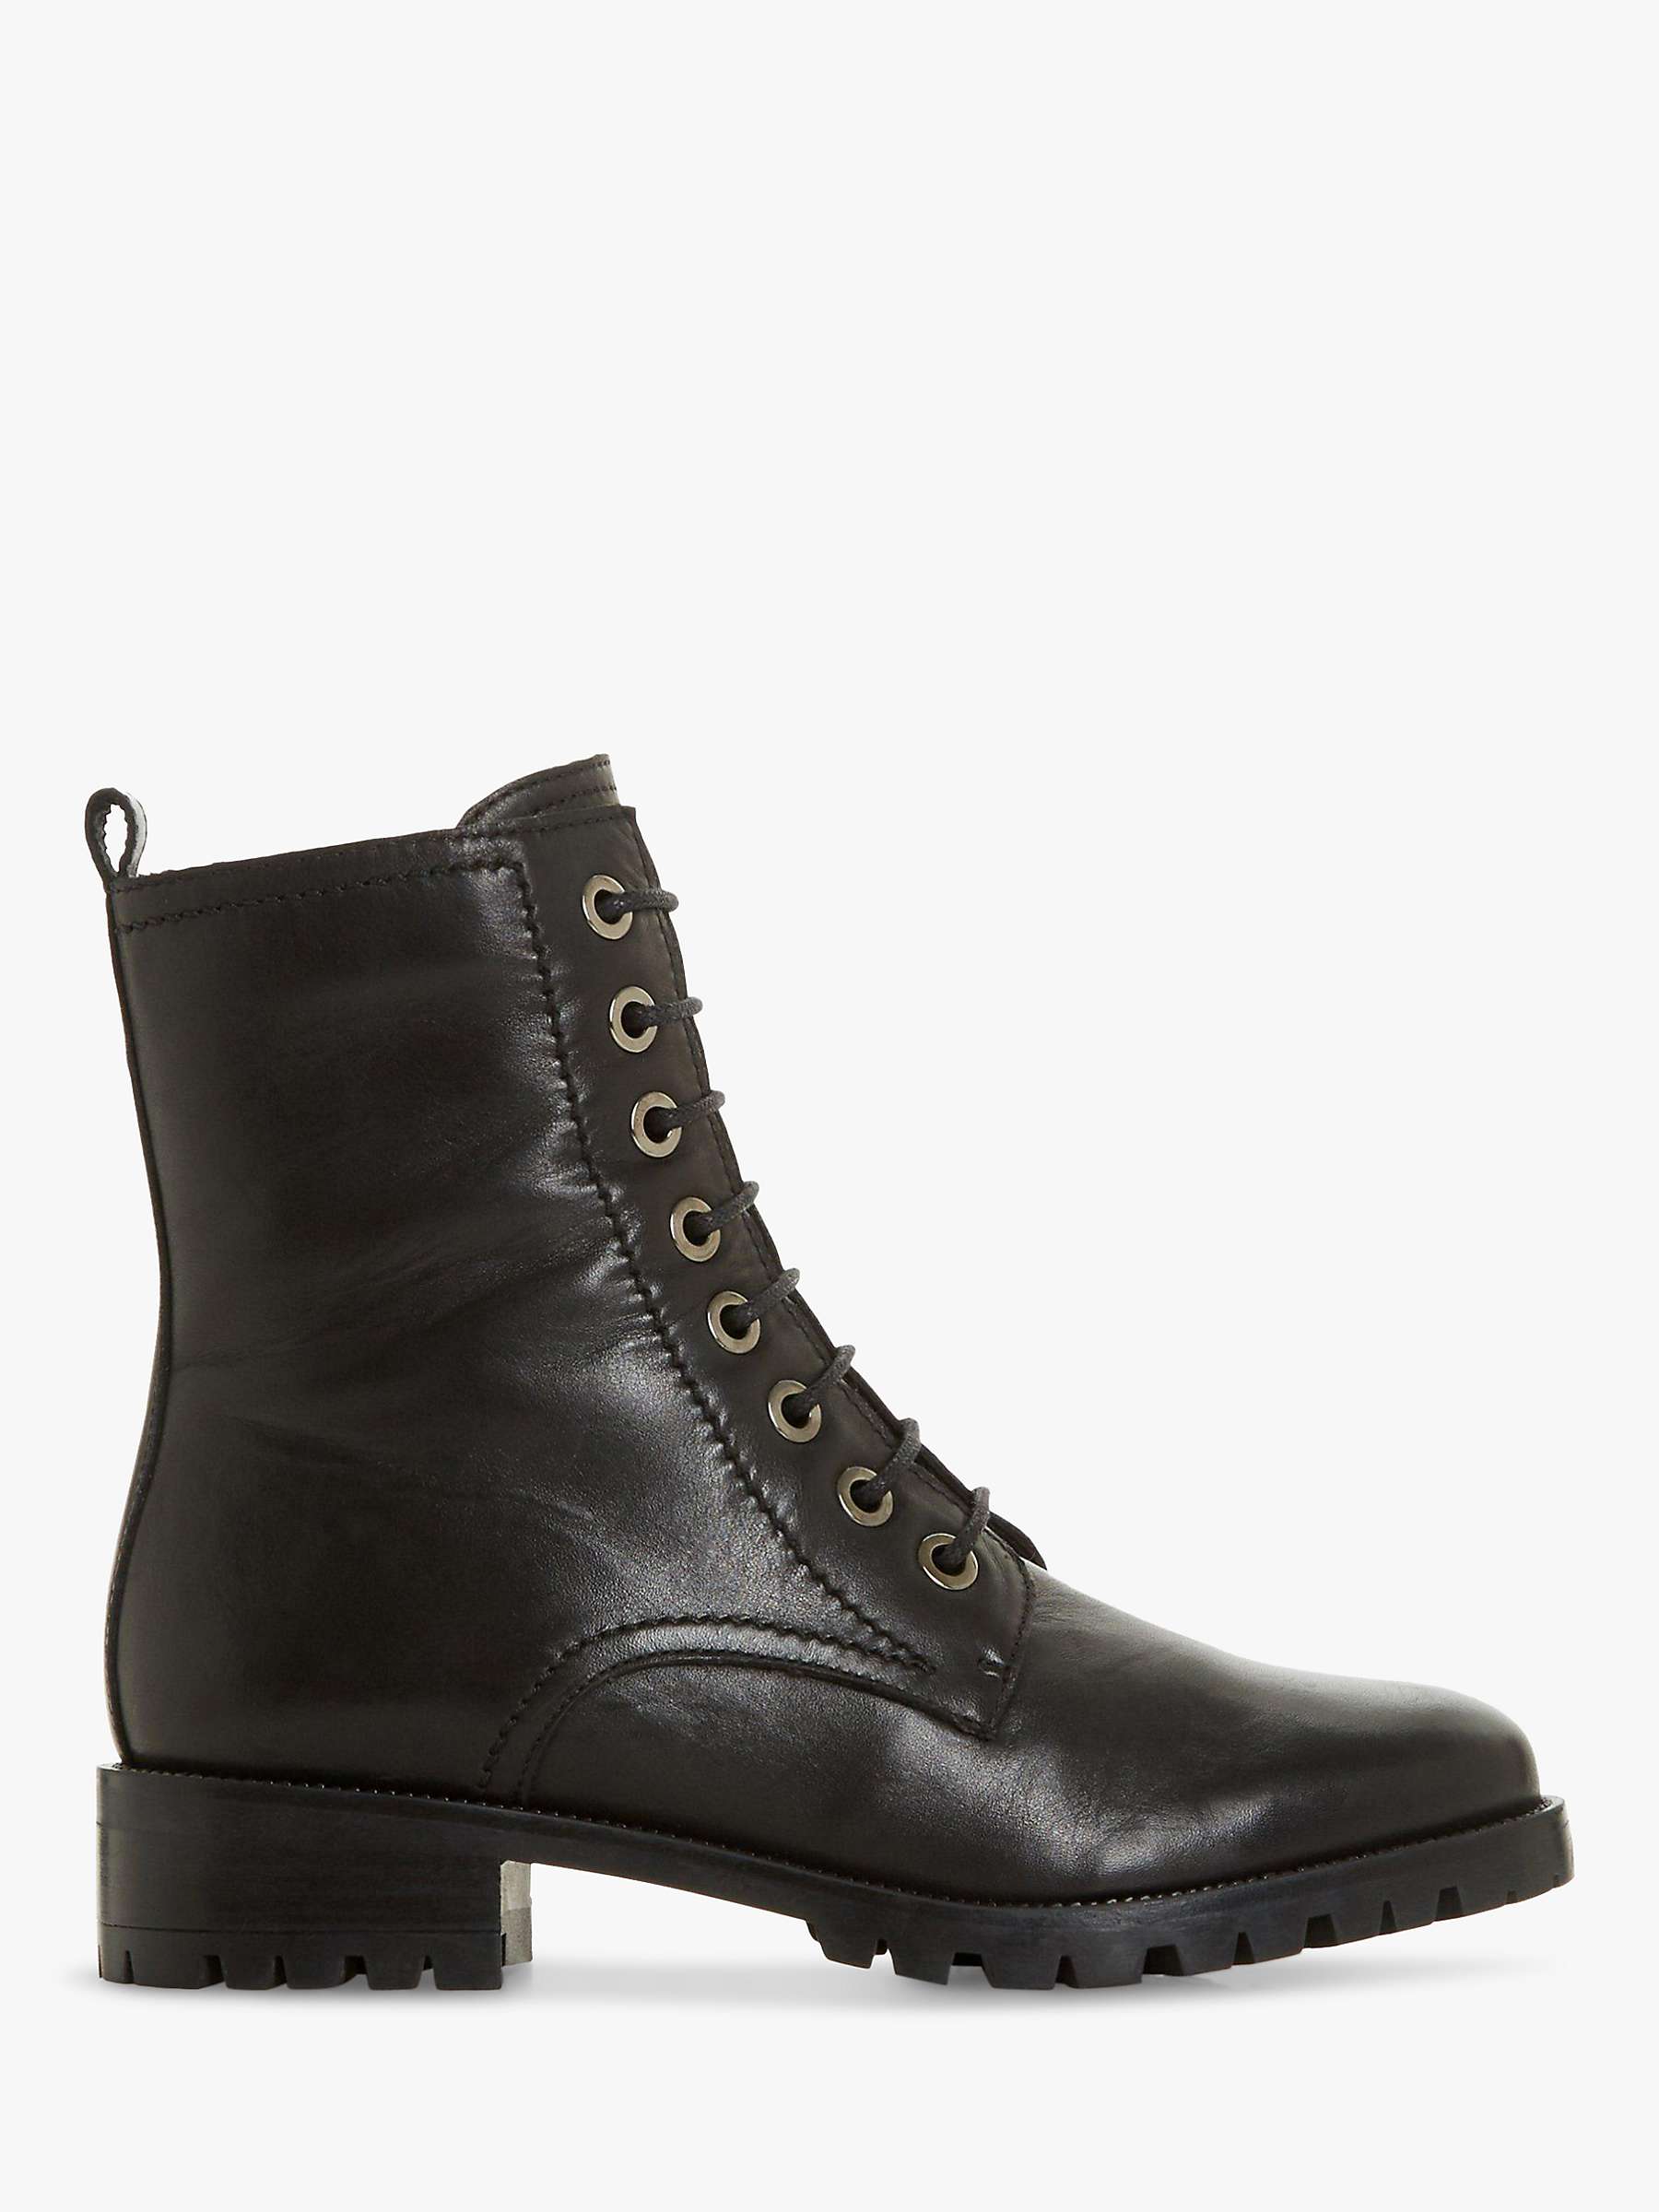 Buy Dune Wide Fit Prestone Leather Cleated Sole Lace-Up Boots, Black Online at johnlewis.com